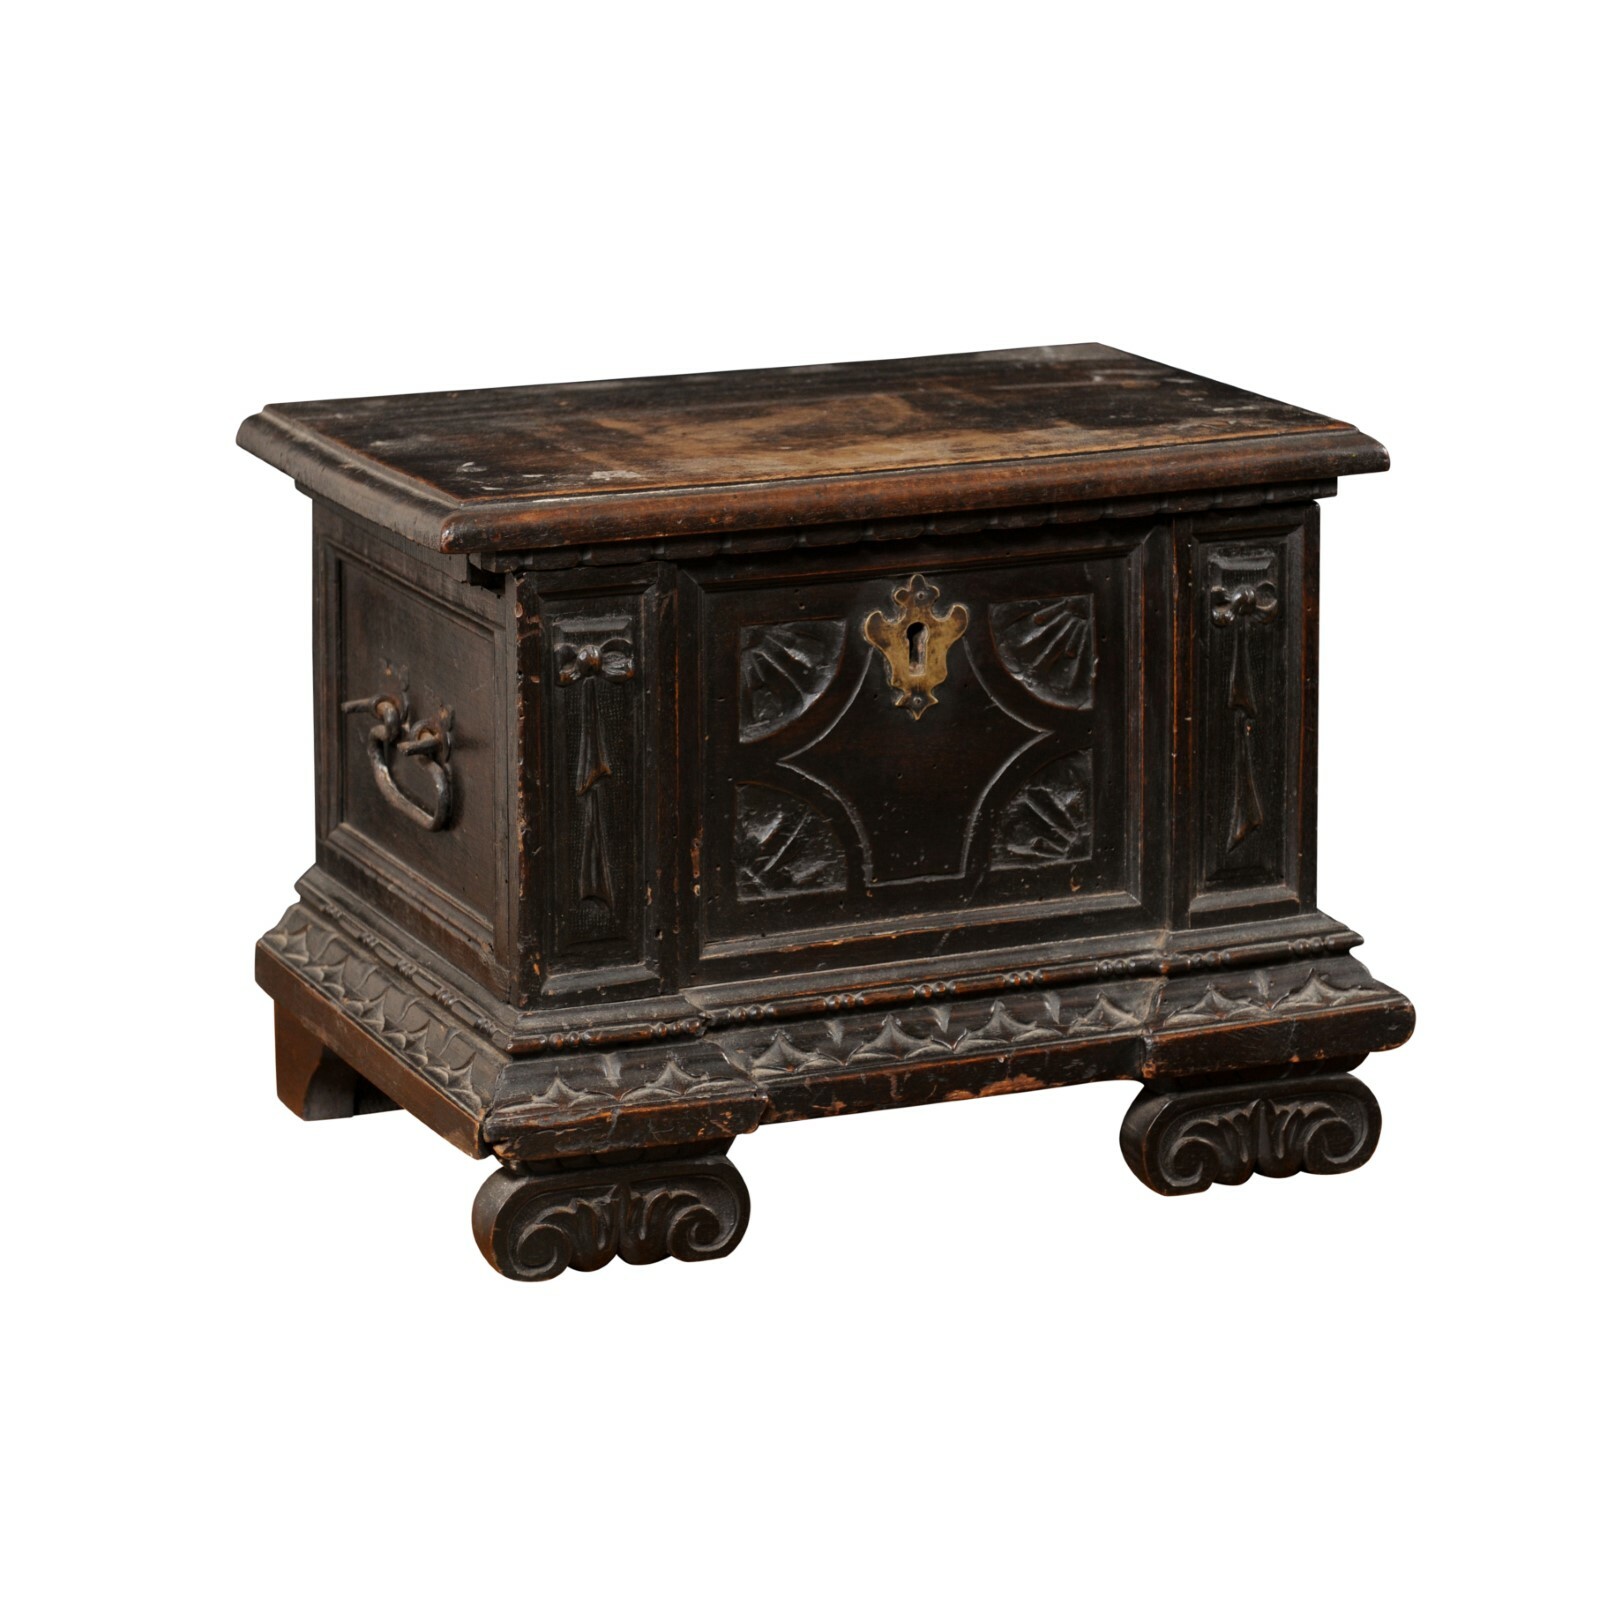 Late 18th C. English Wooden Document Box